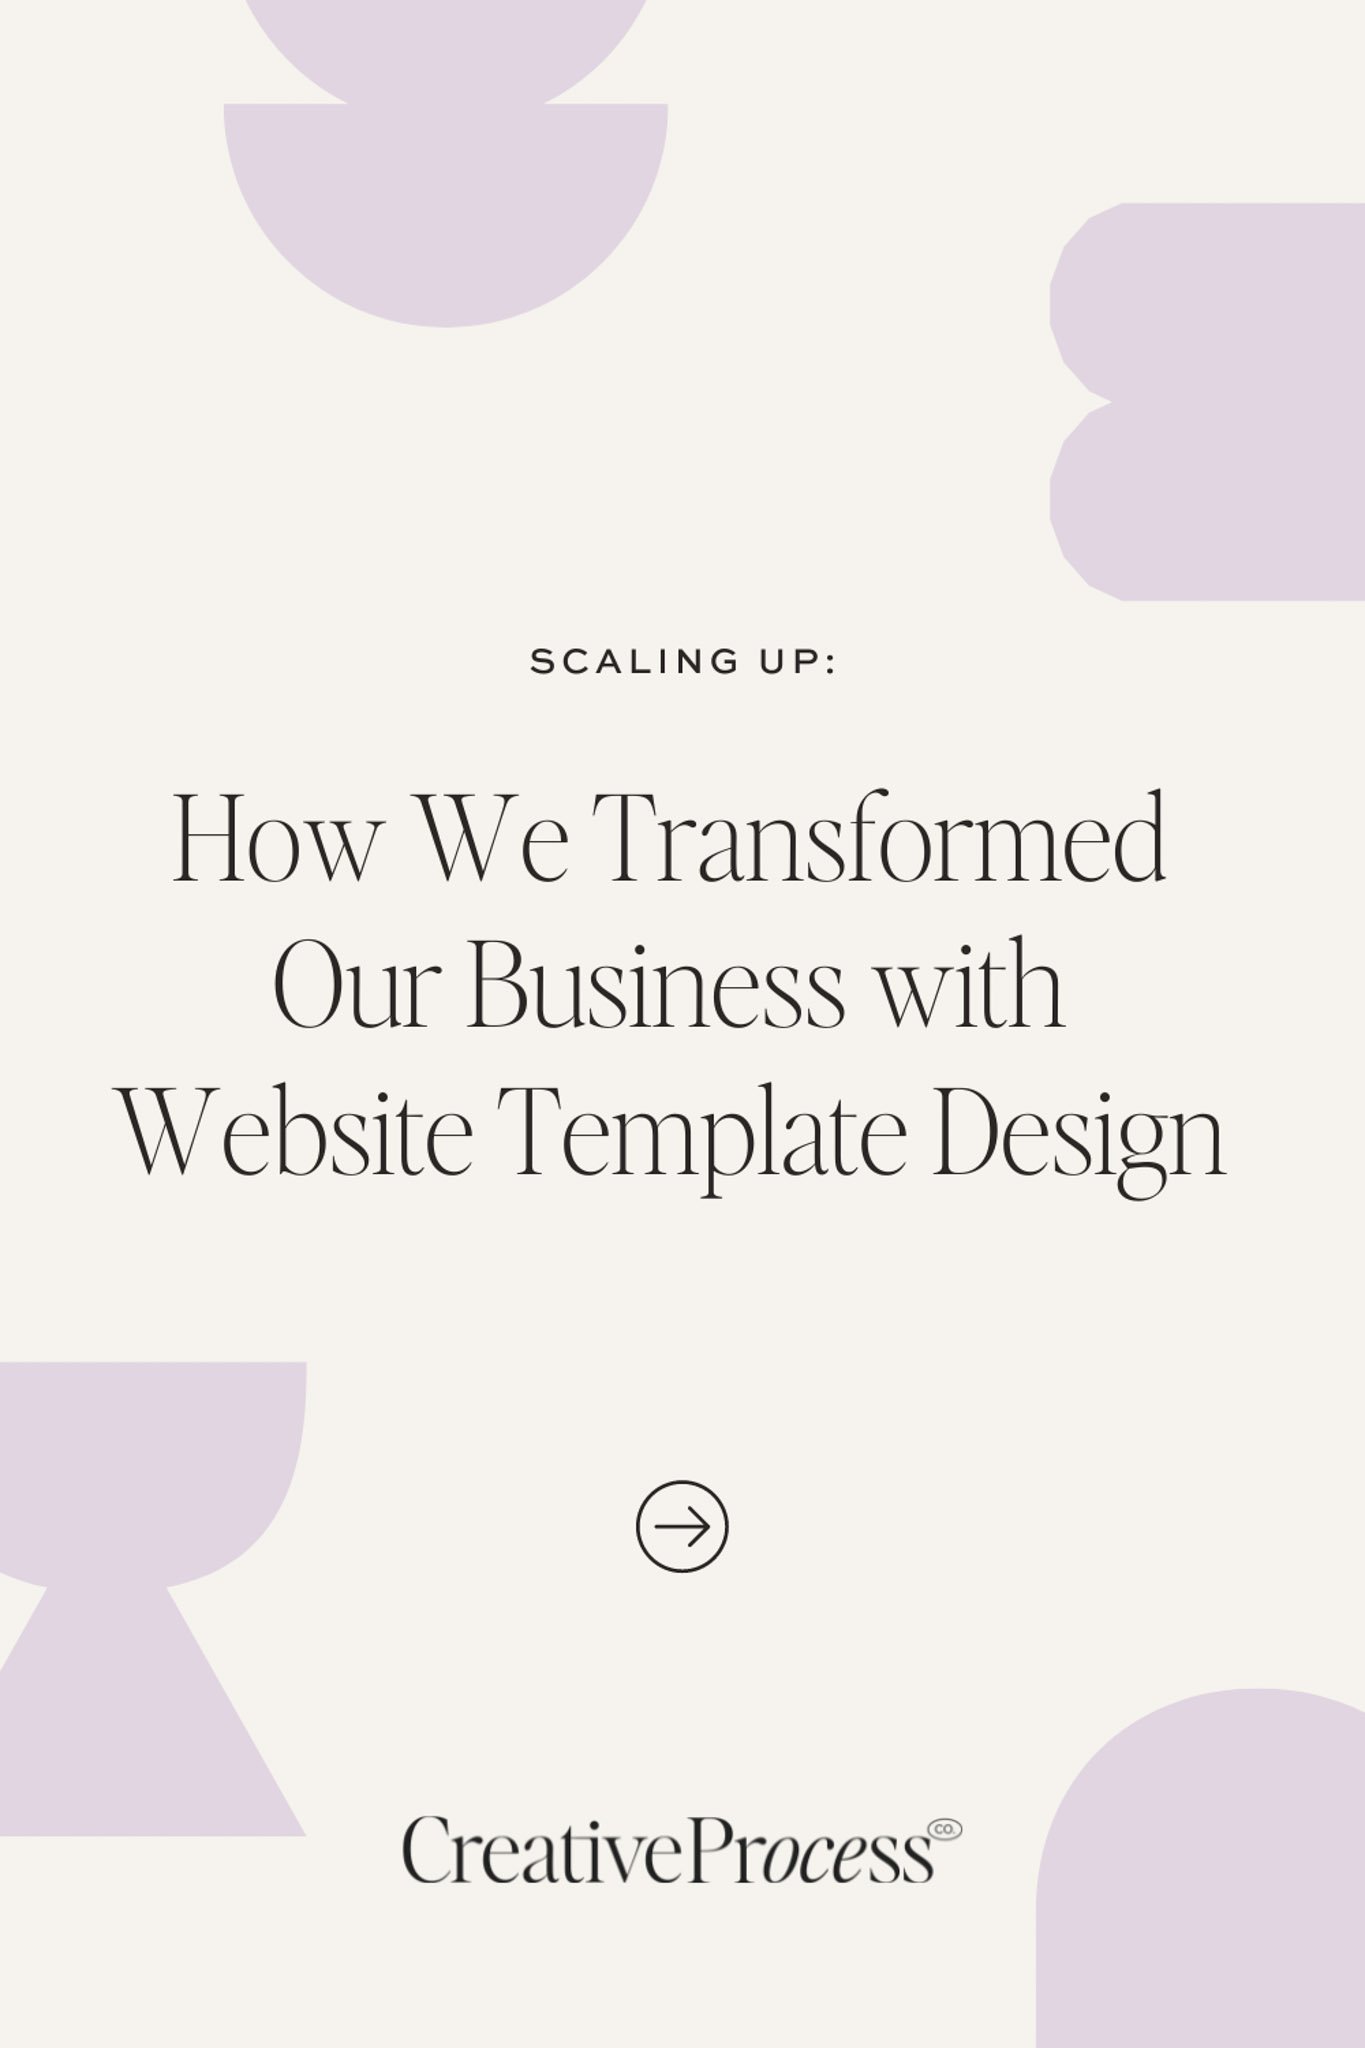 Scaling Up: How We Transformed Our Business with Website Template Design